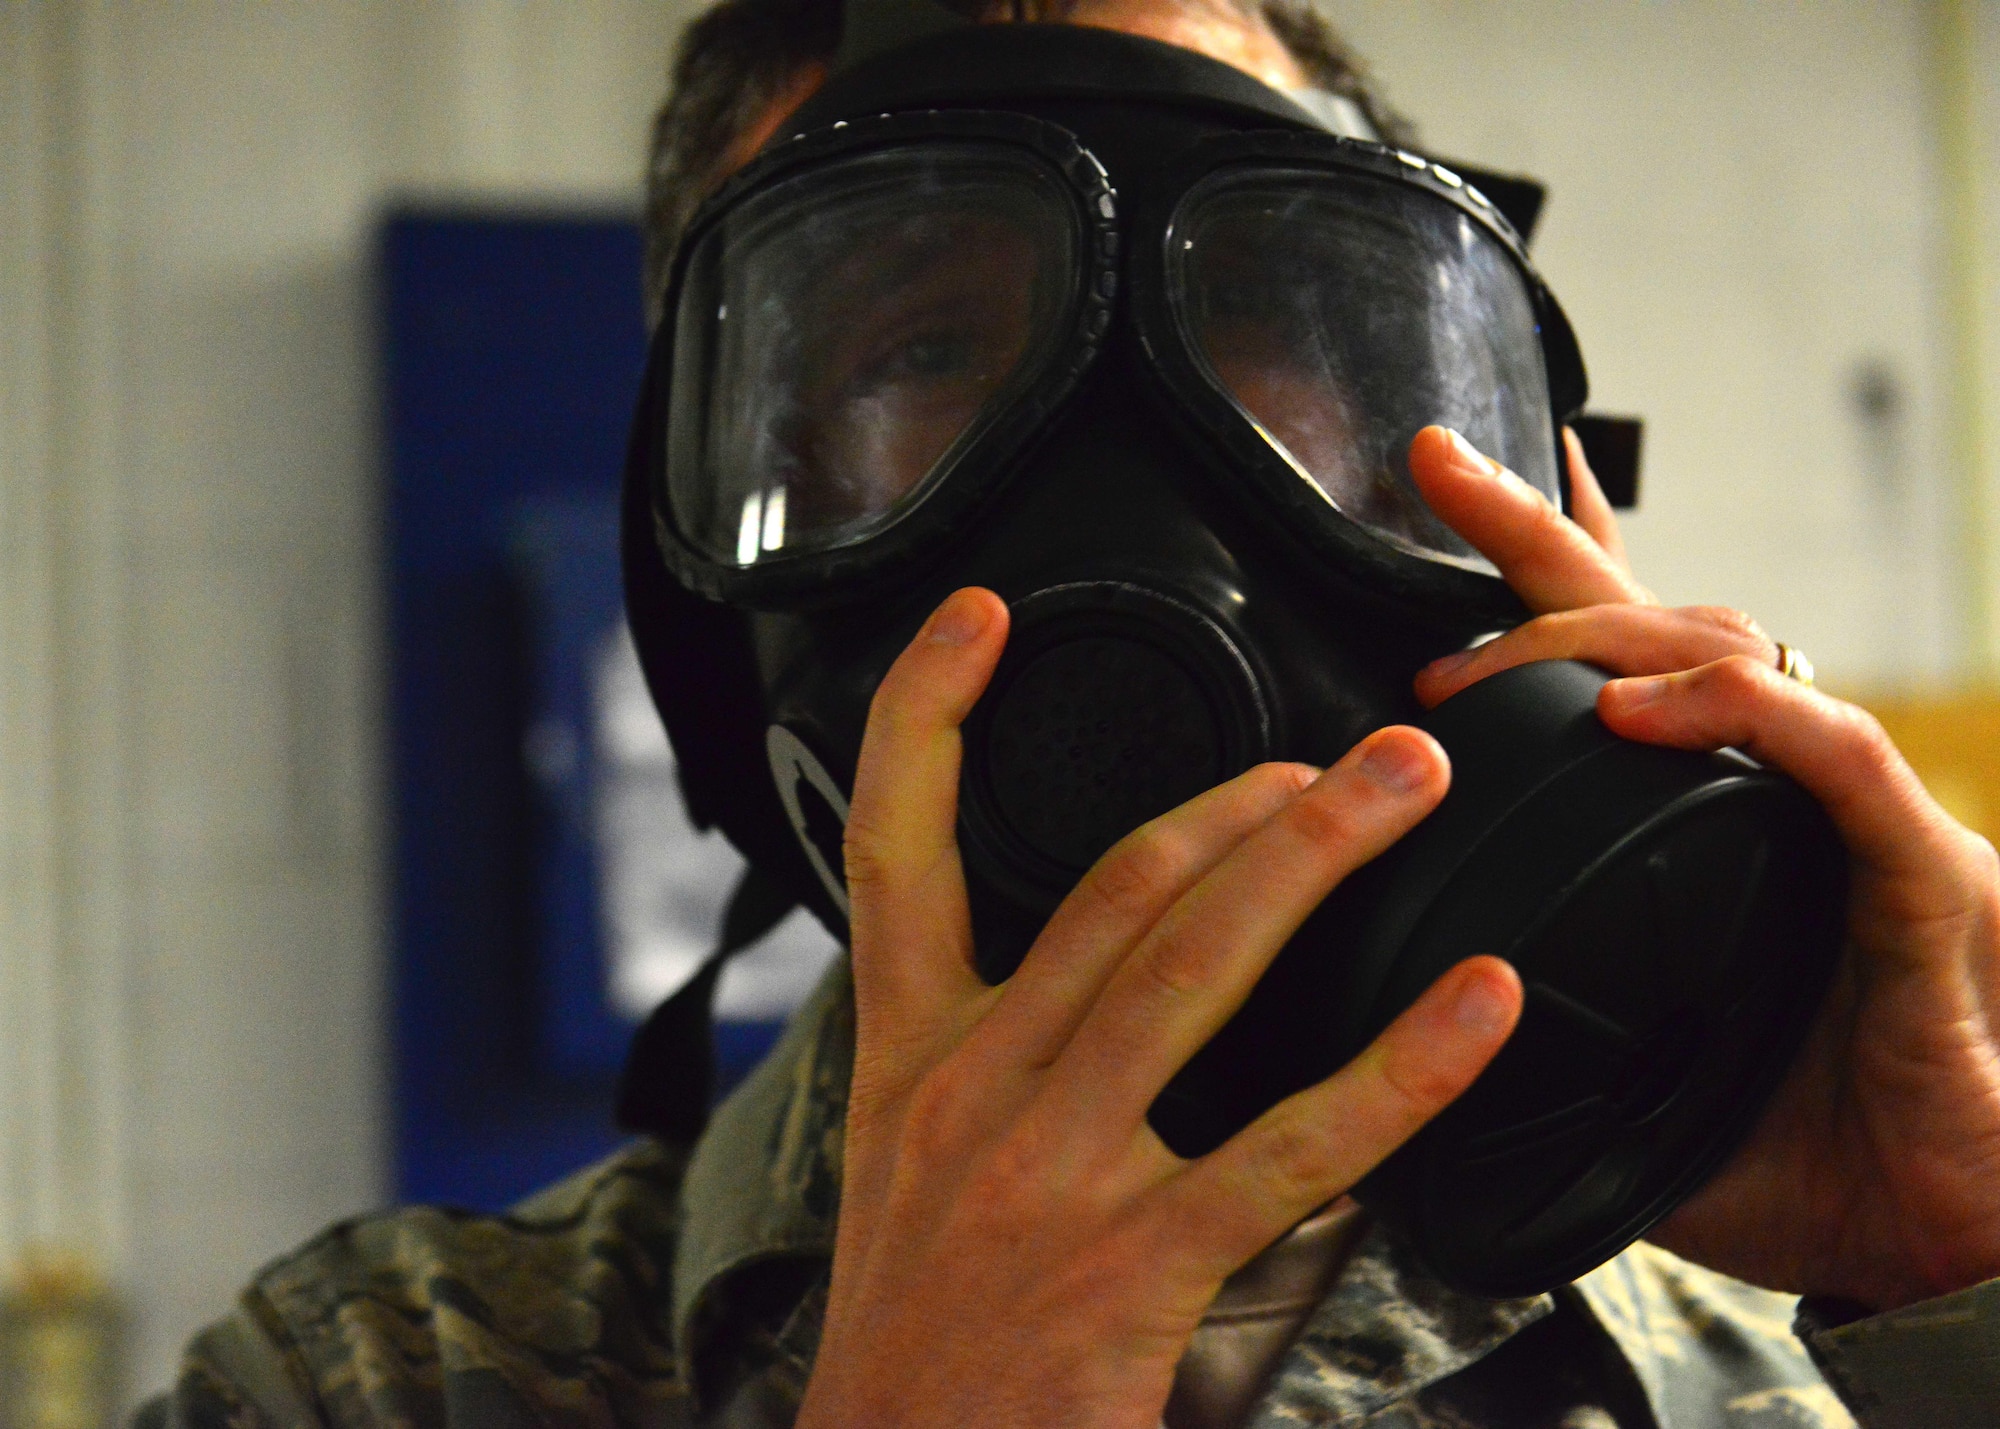 U.S. Air Force Tech. Sgt. Christopher Stahl, Air Combat Command, Heritage of America Band bassoonist, dons a gas mask and checks seal during the German Armed Forces Badge for military Proficiency event at Joint Base Langley-Eustis, Va., Nov. 2, 2016.  The GAFPB includes a pass or fail nuclear, biological, chemical evaluation of donning a protective mask within nine seconds.  (U.S. Air Force photo/Tech Sgt. Daylena S. Ricks)